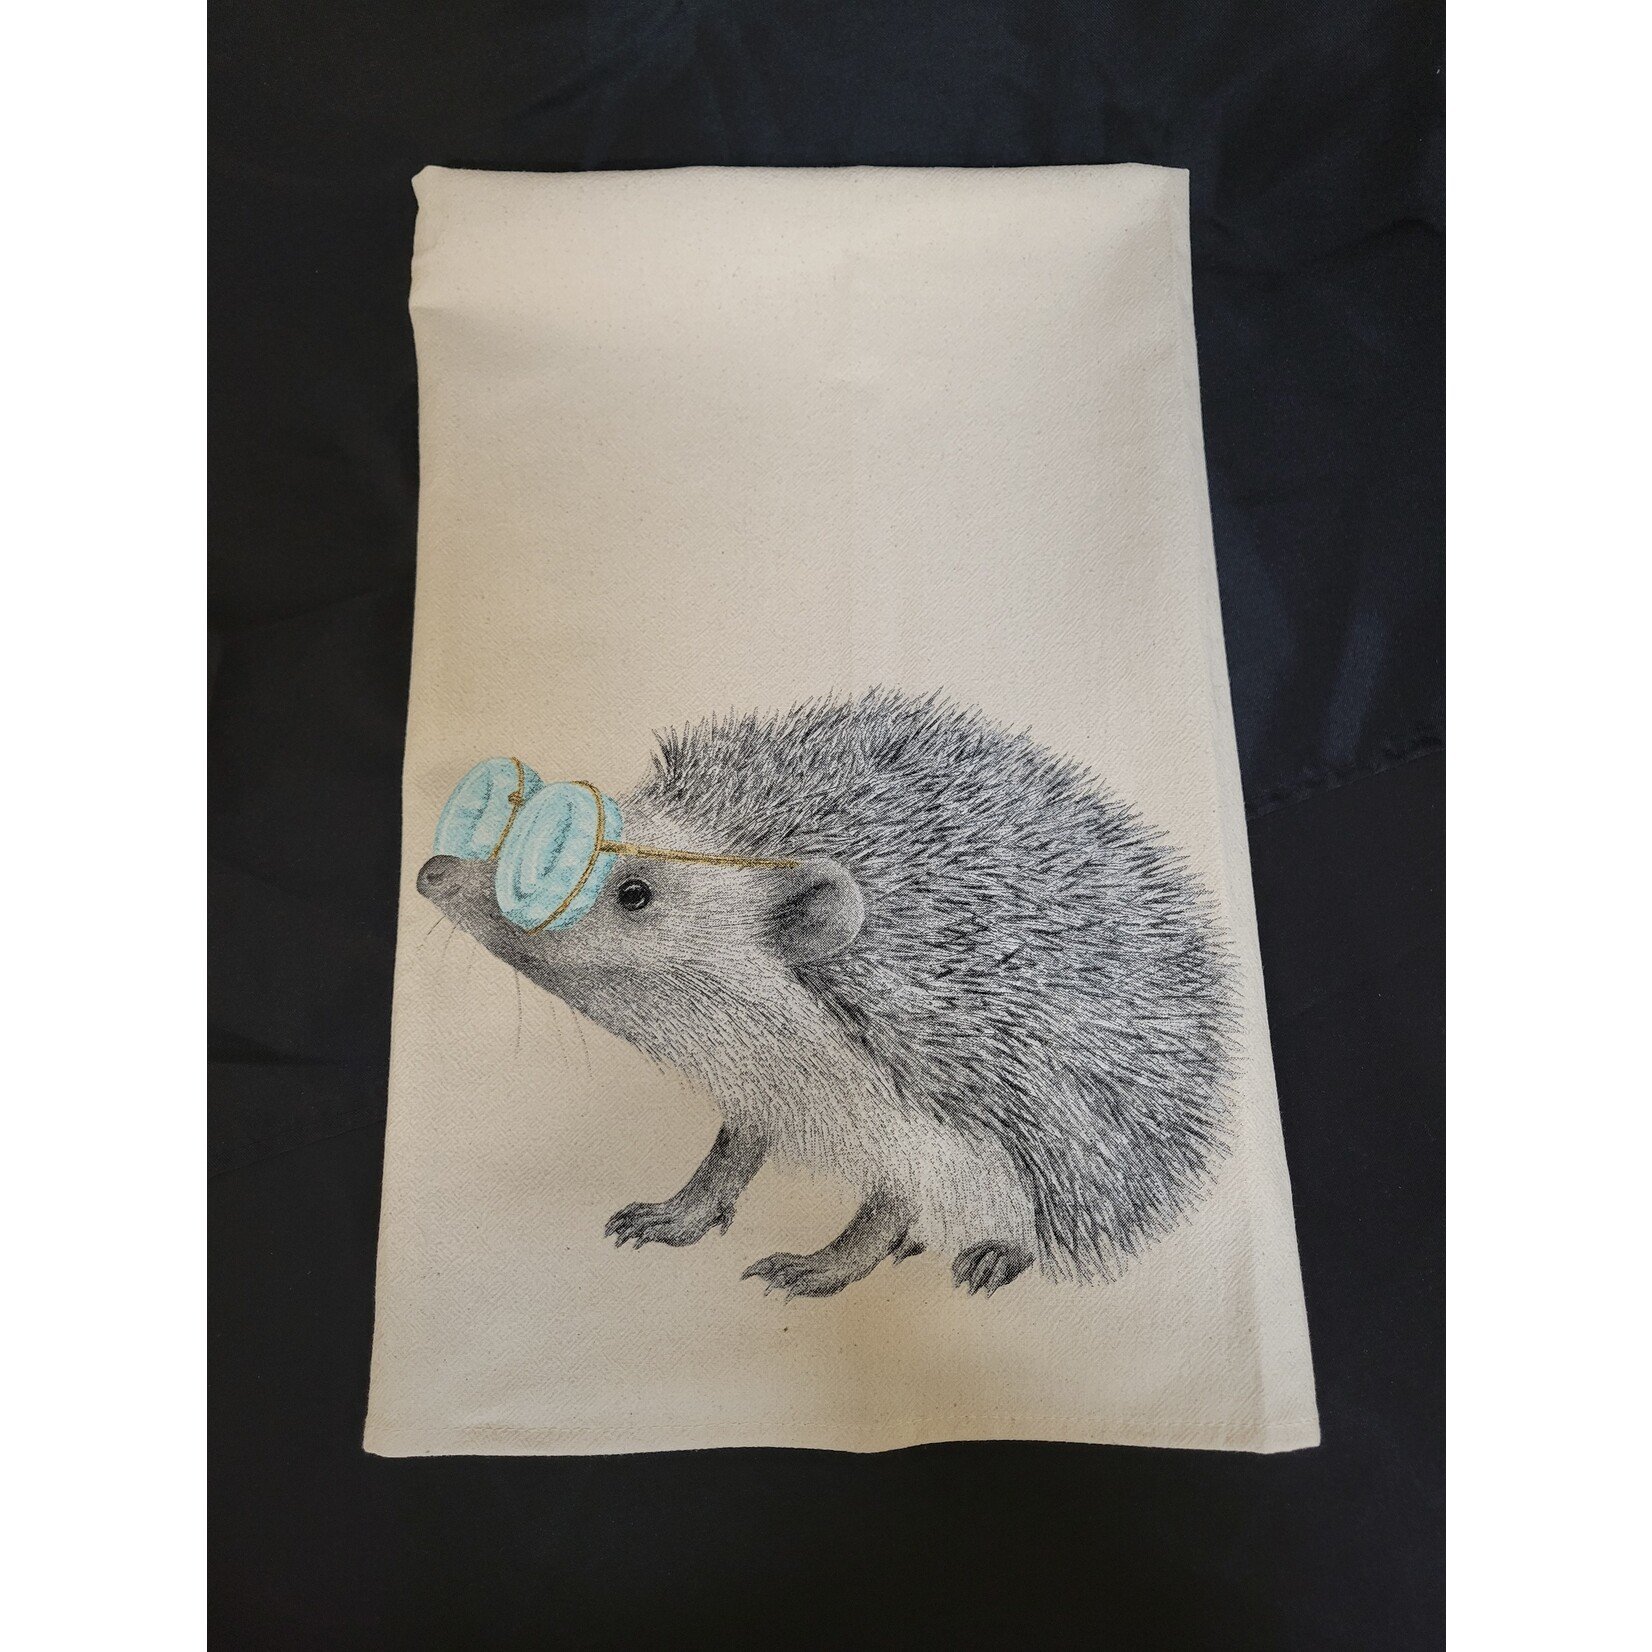 Eric and Christopher Hedgehog with Glasses Tea Towel